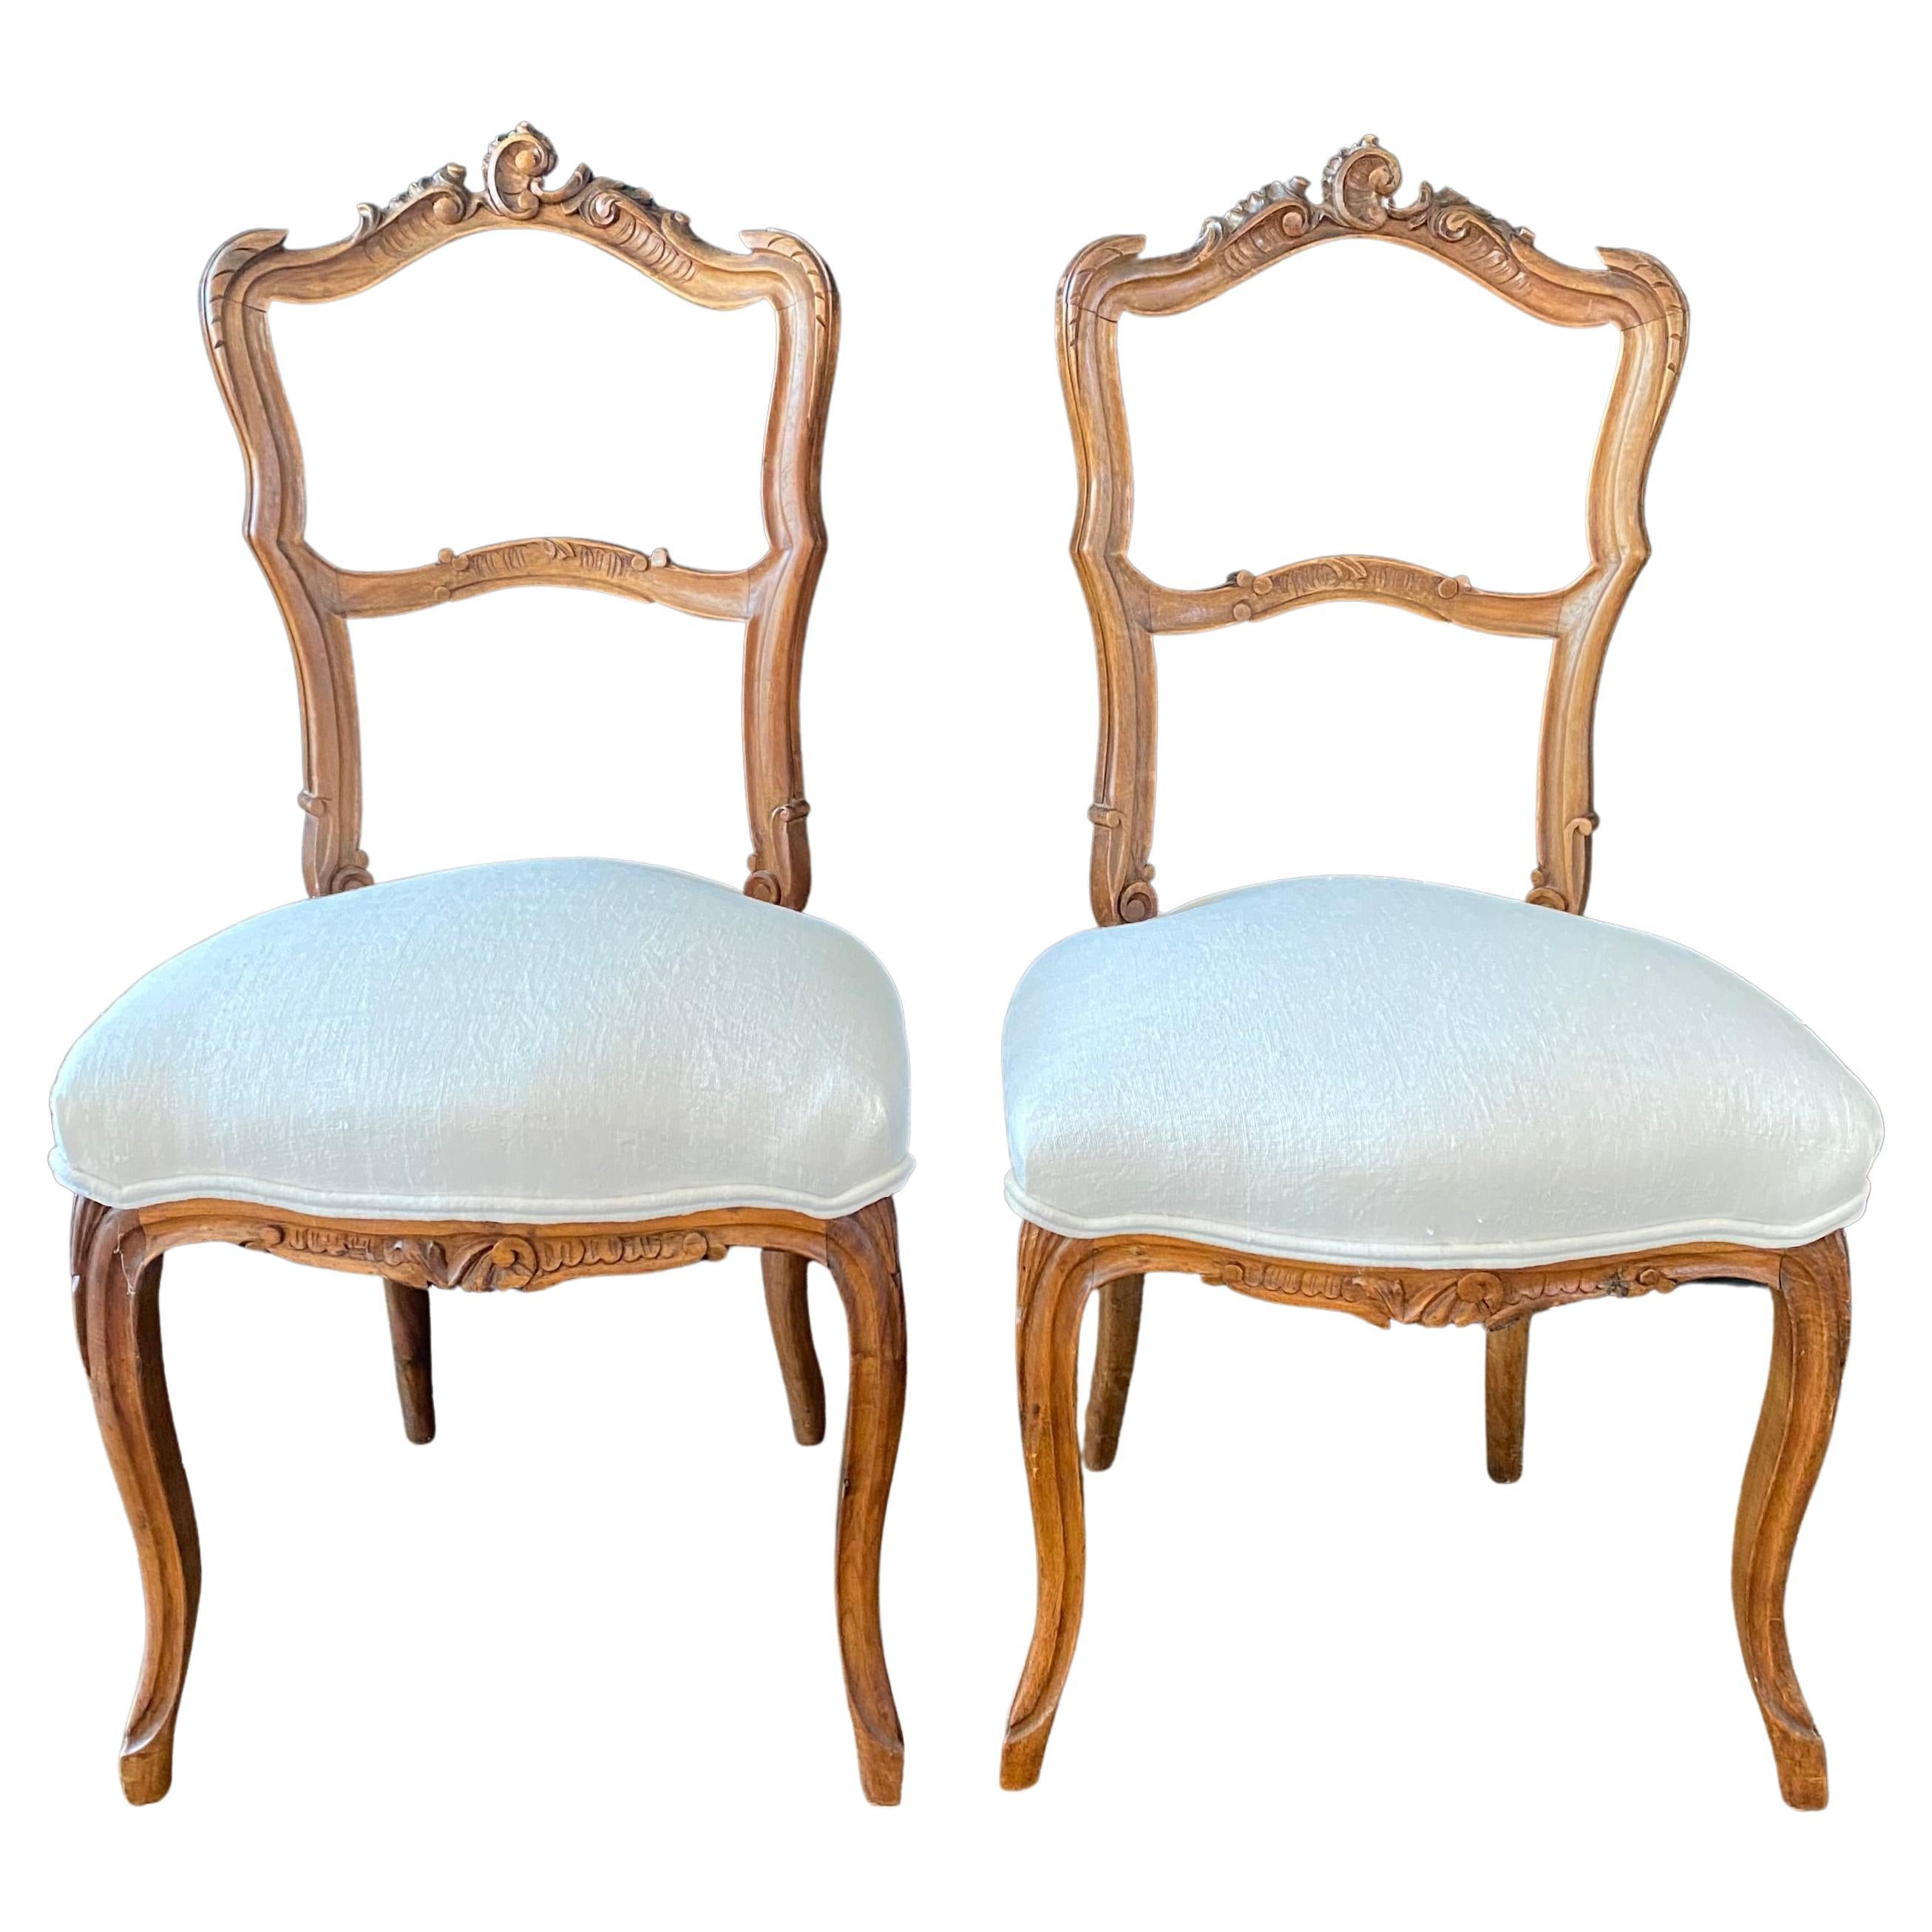 Lovely Pair of 19th Century Intricately Carved Walnut Louis XVI Chairs